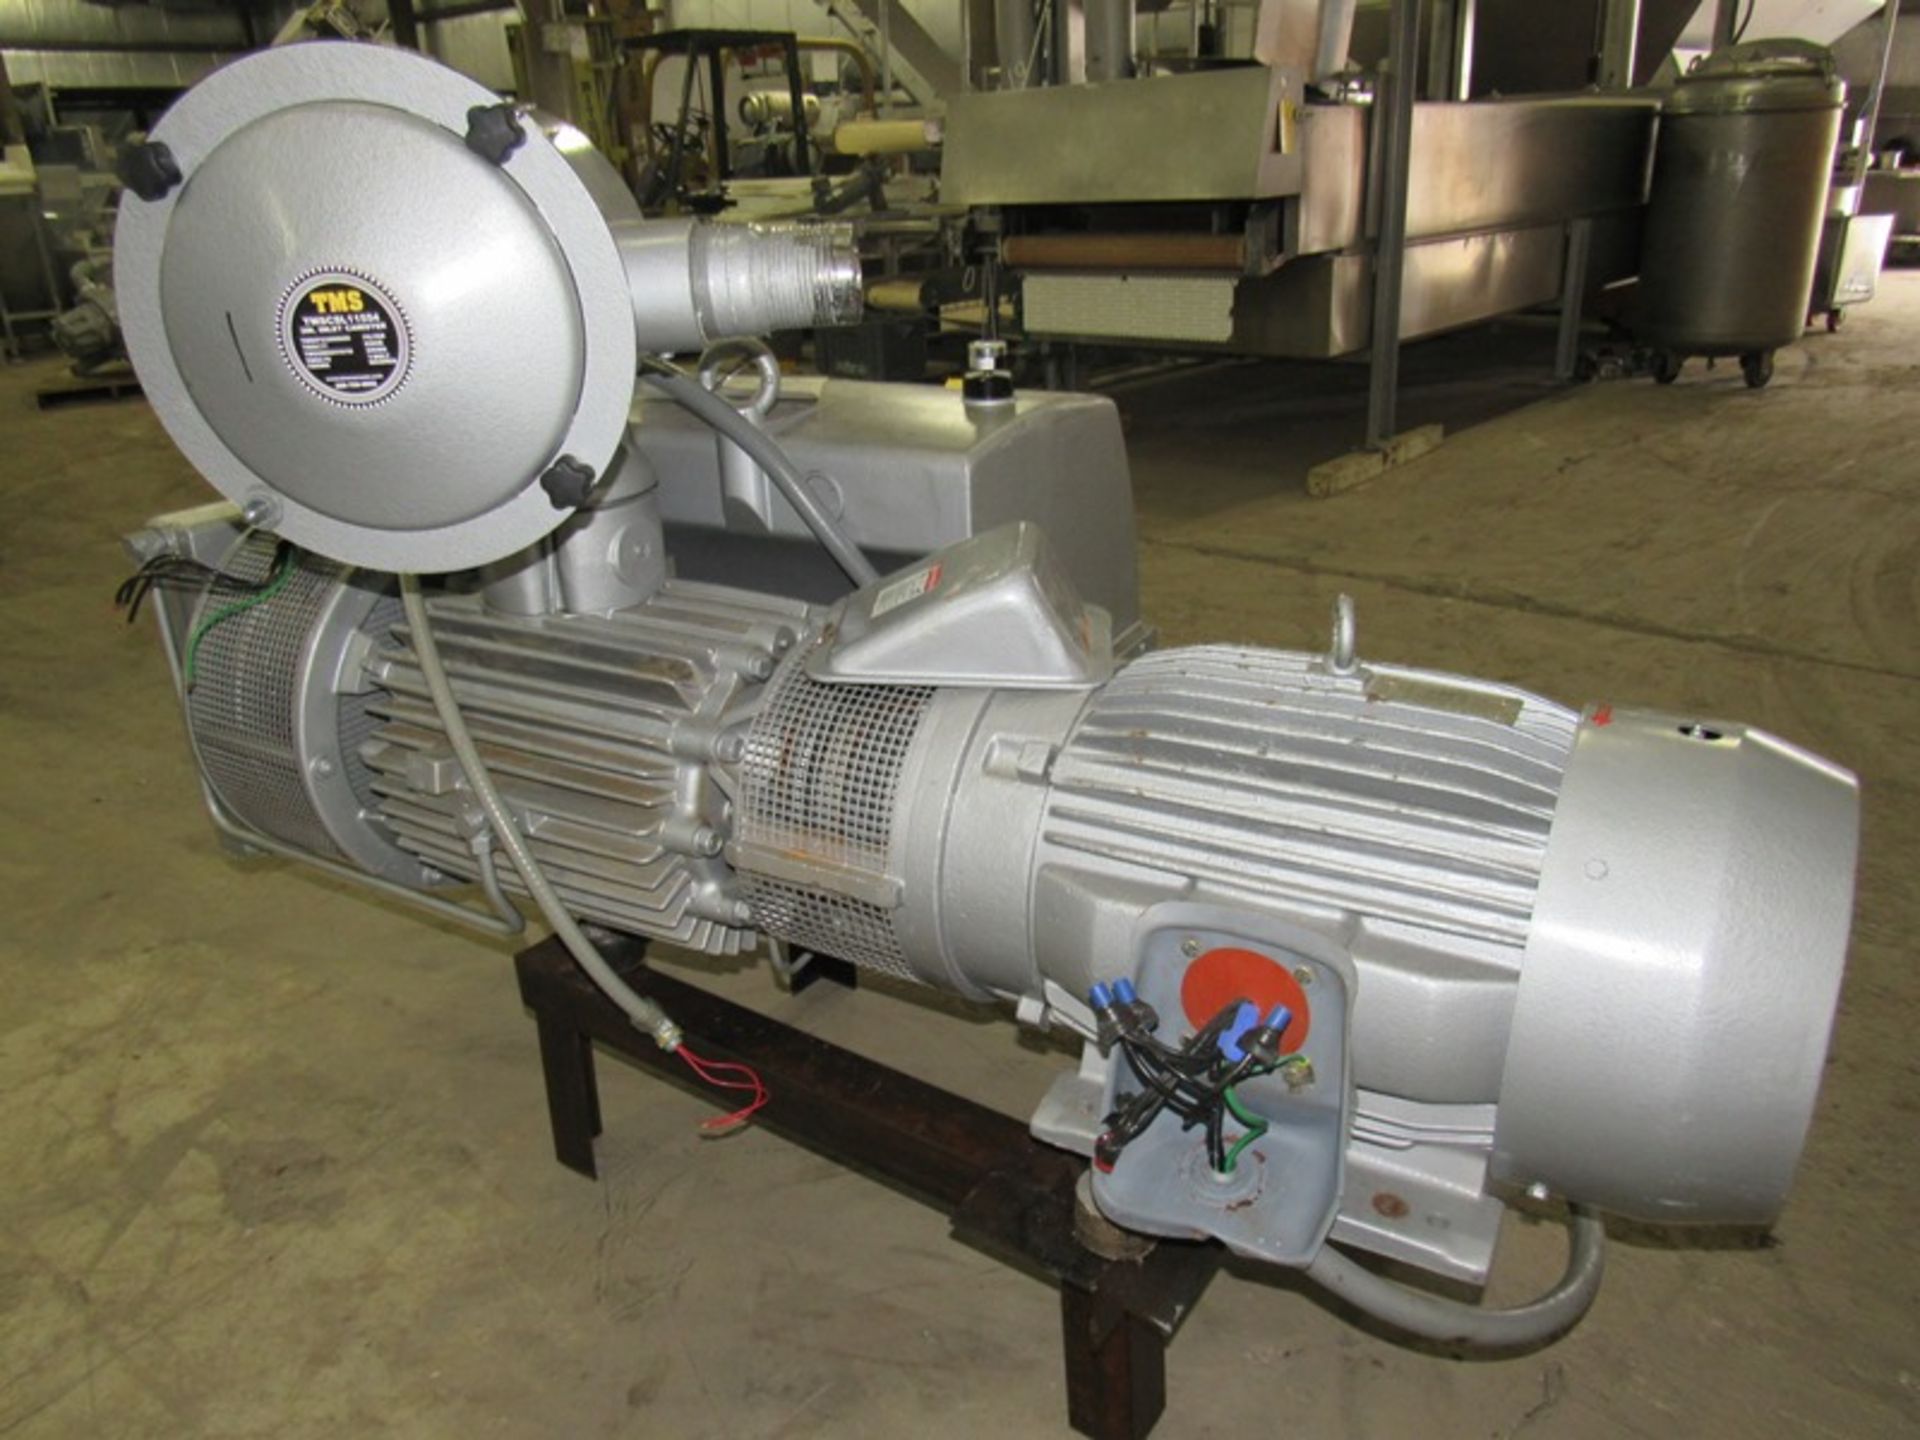 Busch Mdl. RA630 Vacuum Pump, 25 h.p., 230/460 volts, 3 phase, heat exchanger, rebuilt by TMS, - Image 2 of 6